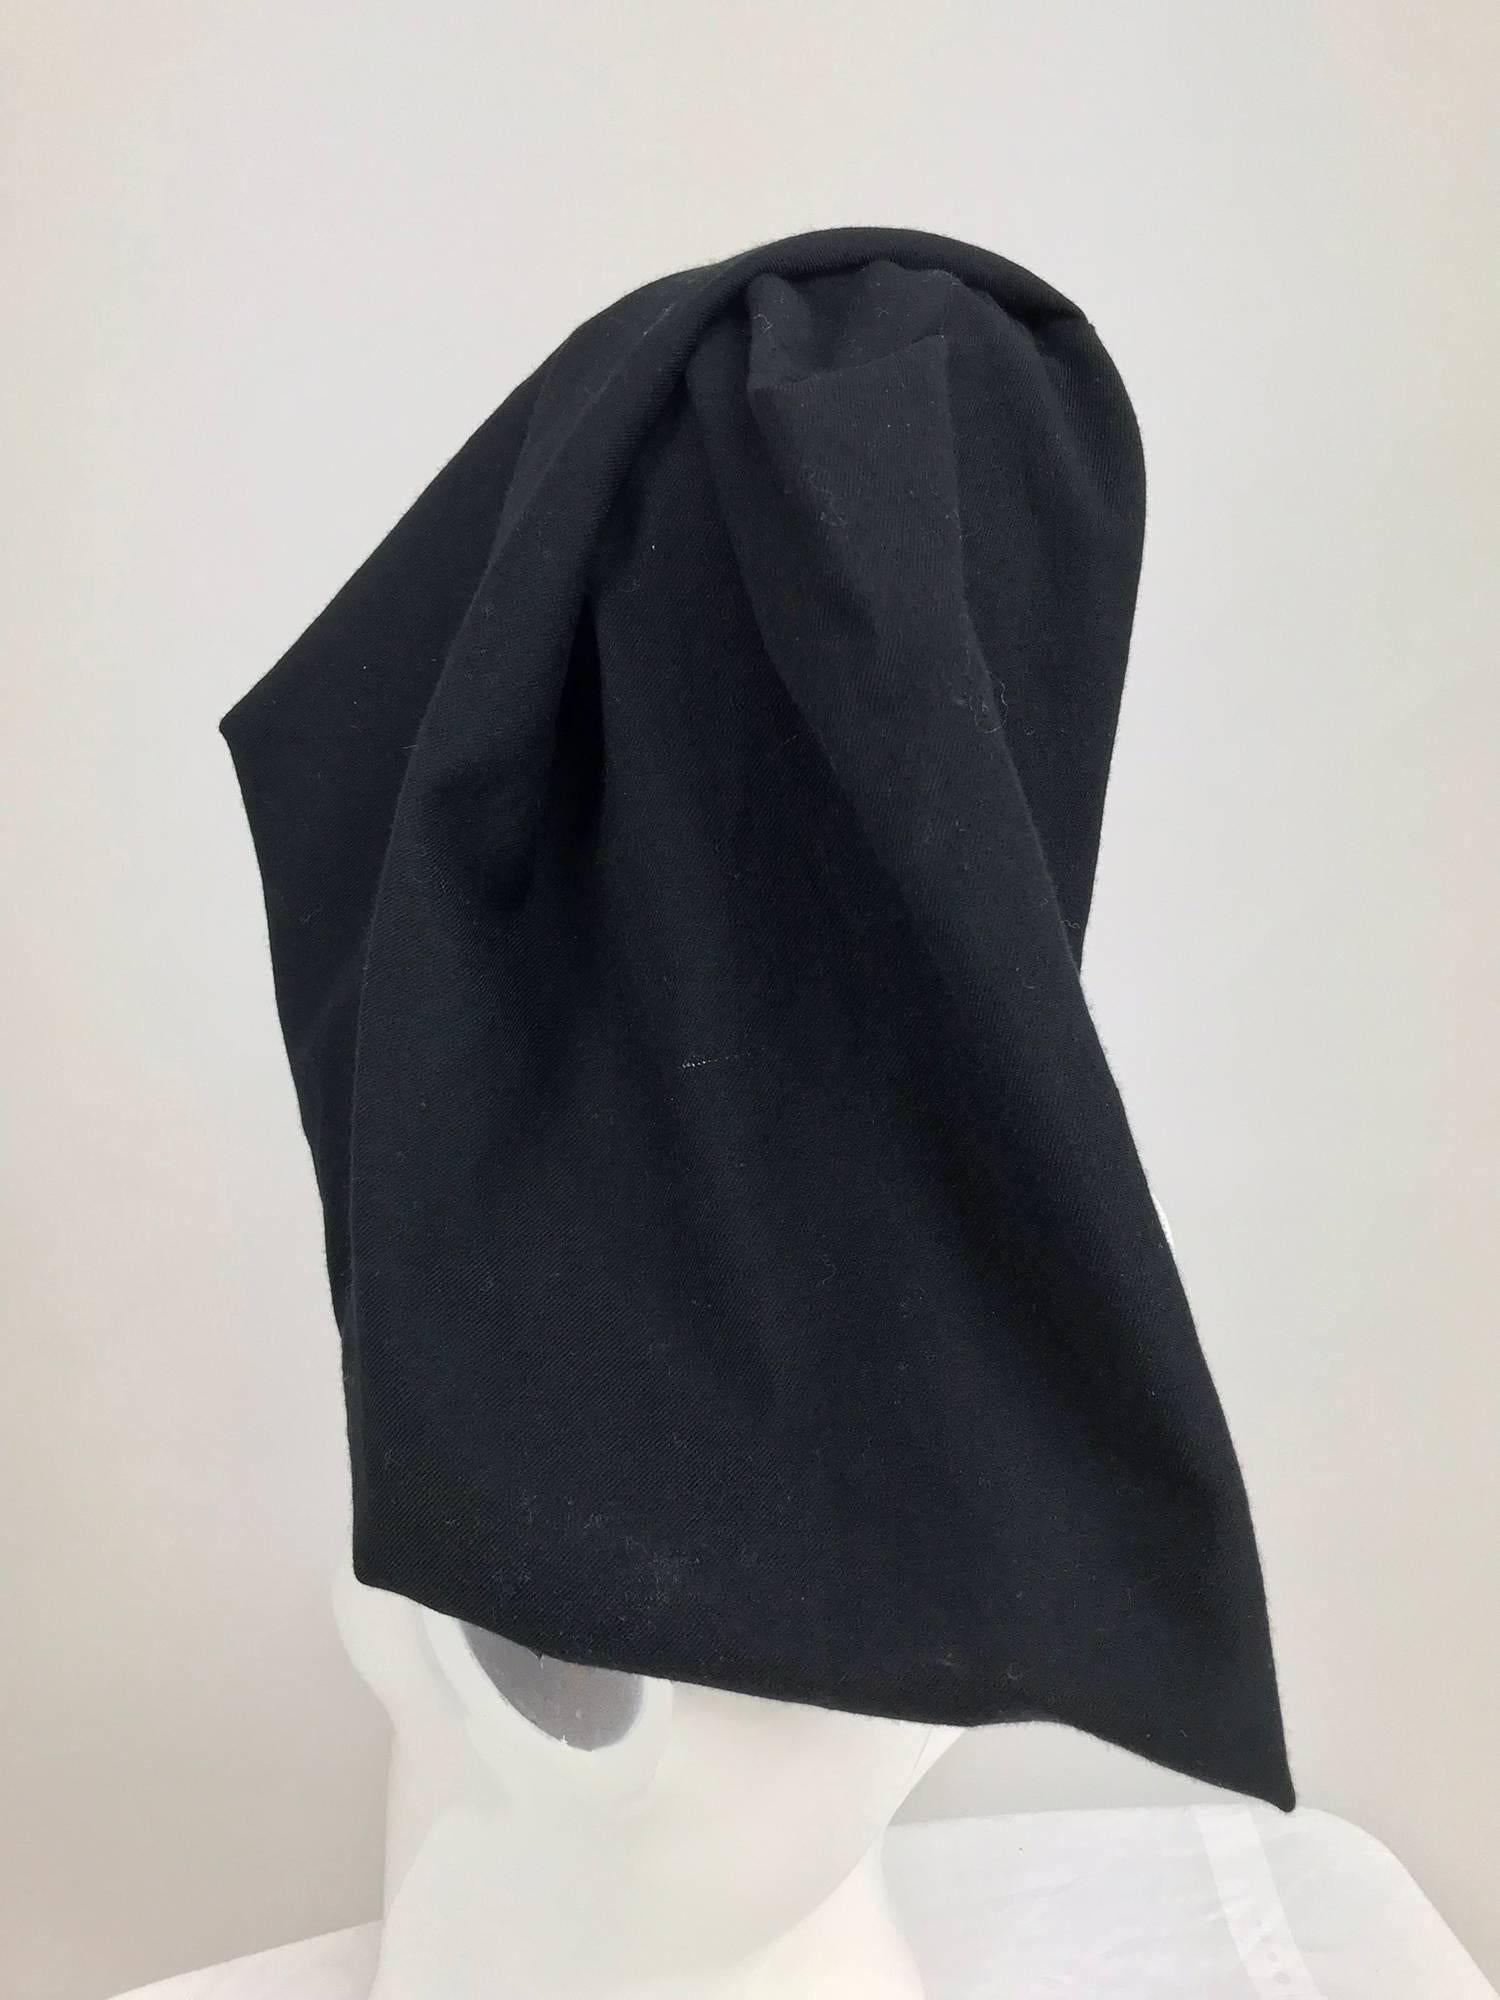 Comme des Garcons black wool asymmetrical hat...Seamed hat can be worn at many angles...Head band with narrow black banding trim...Unlined...
In excellent wearable condition... All our clothing is dry cleaned and inspected for condition and is ready